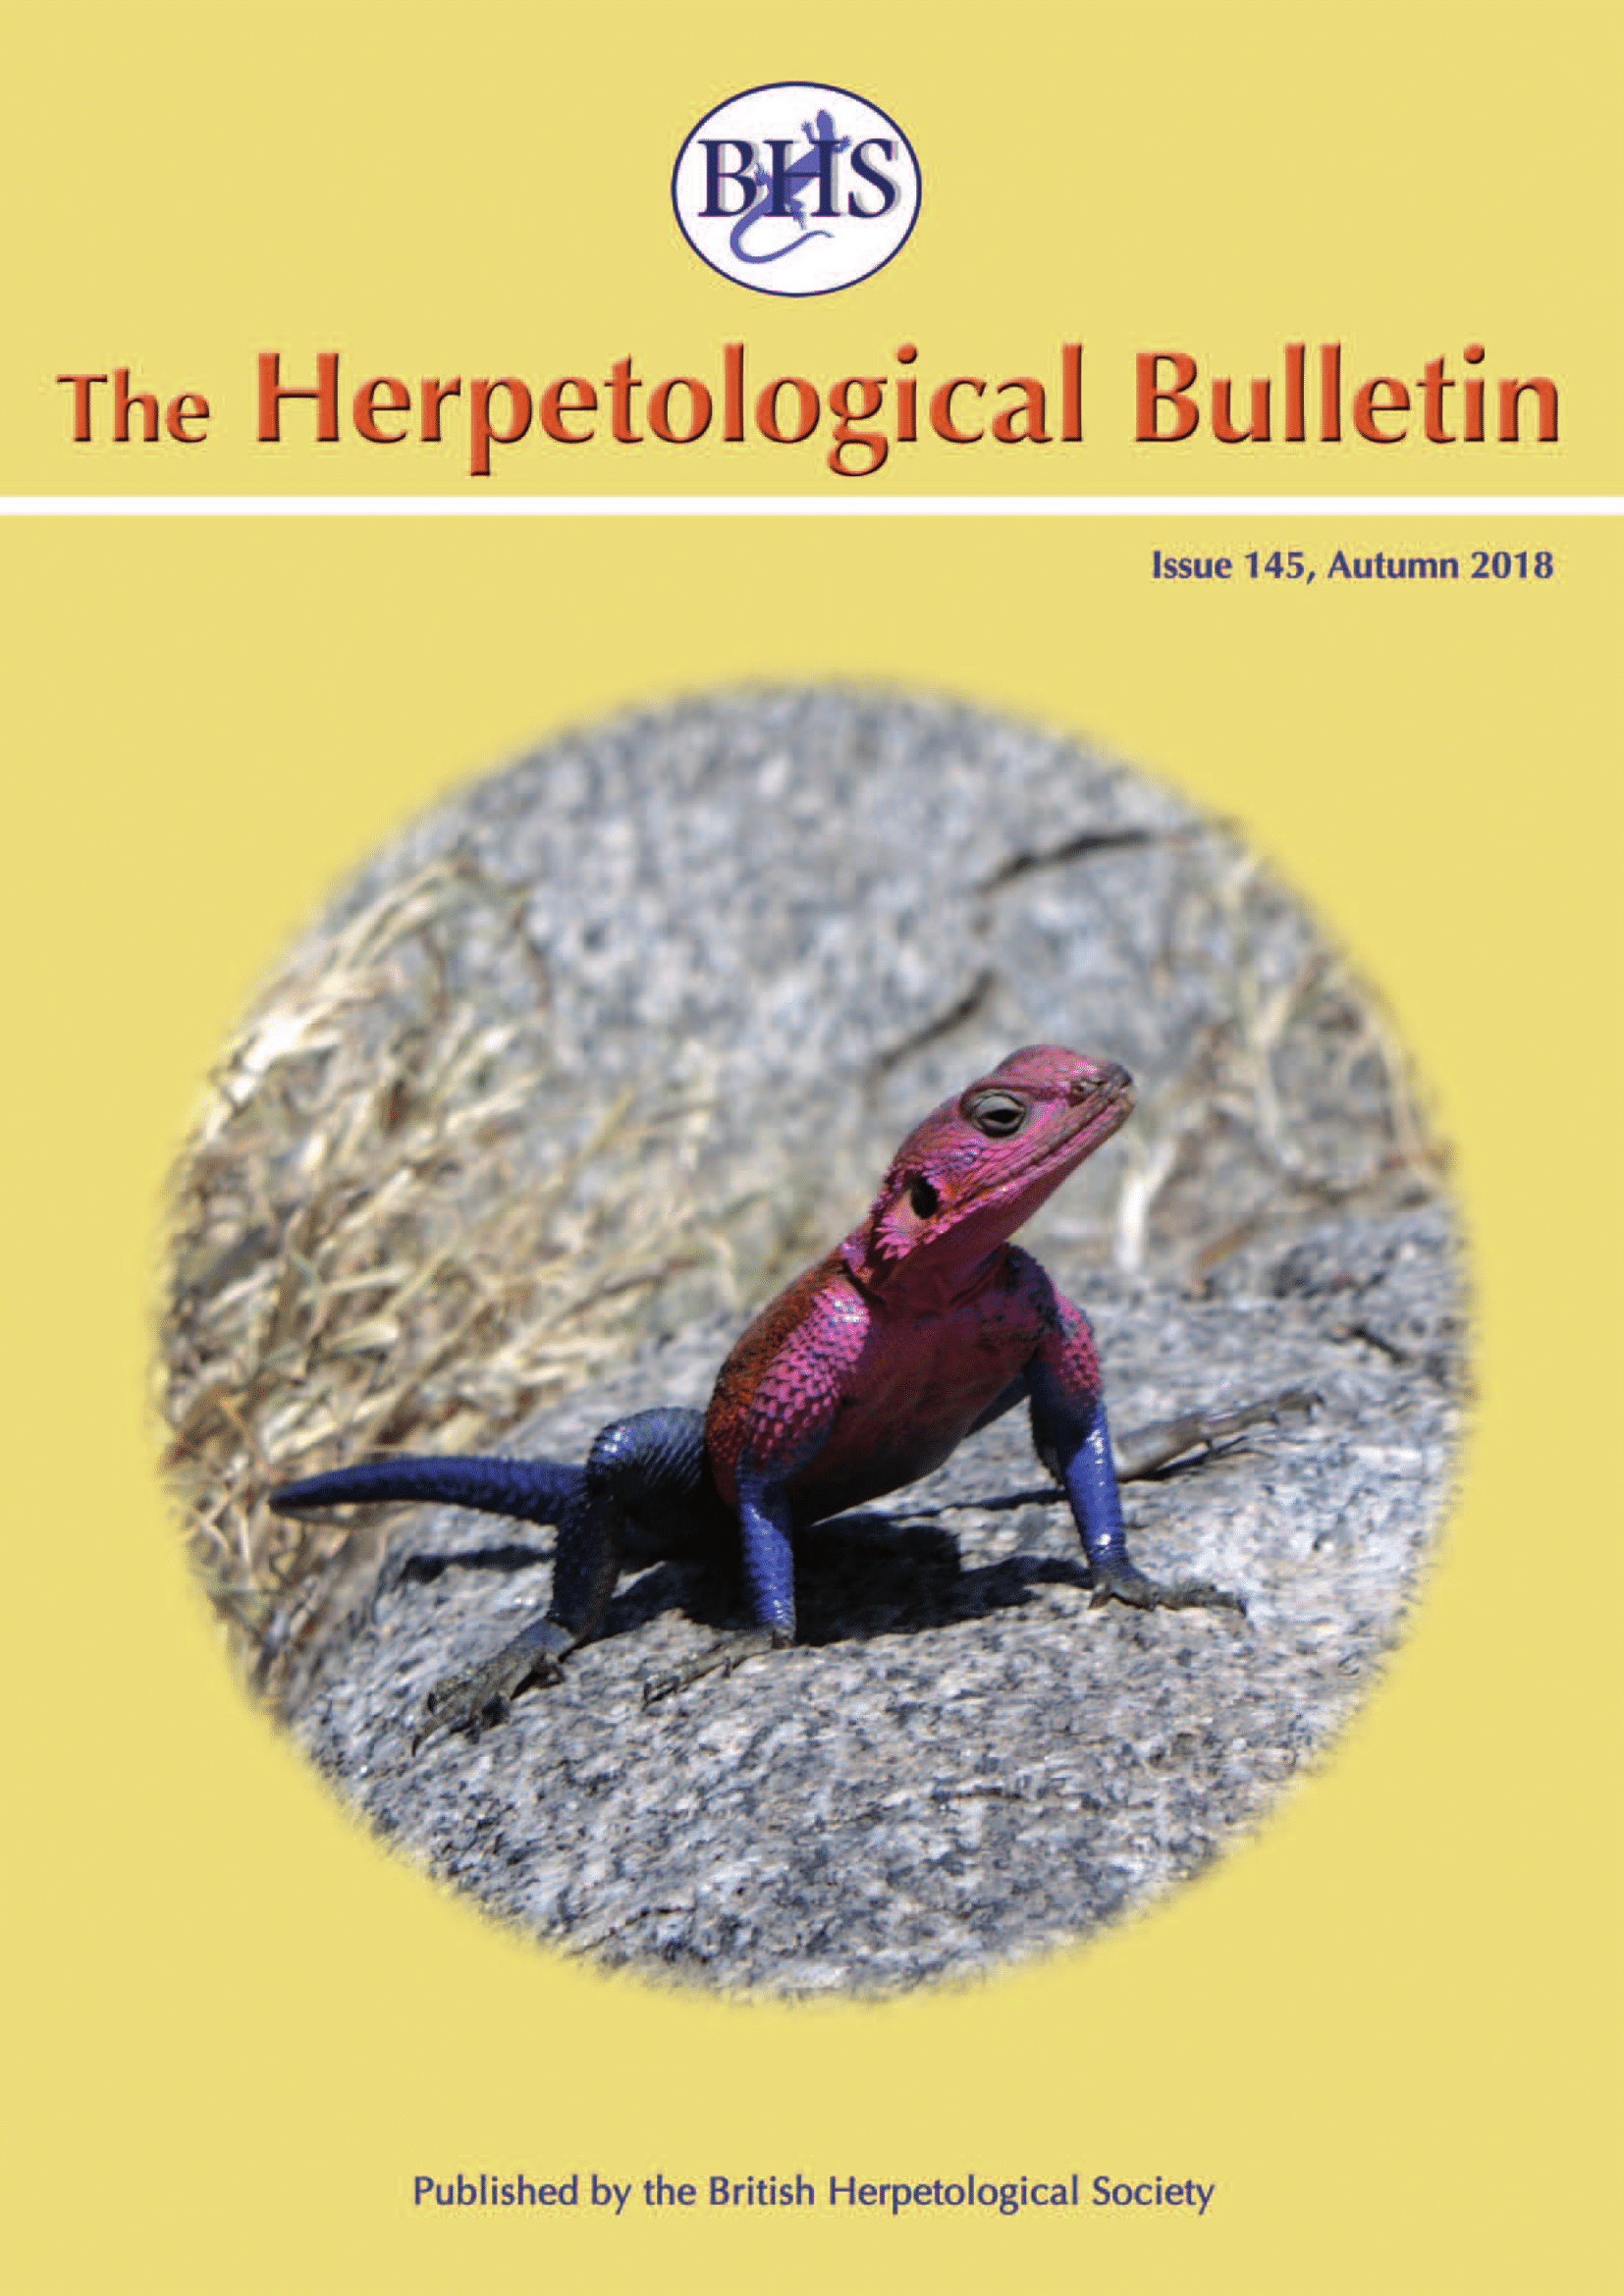 The Herpetological Bulletin Issue 145